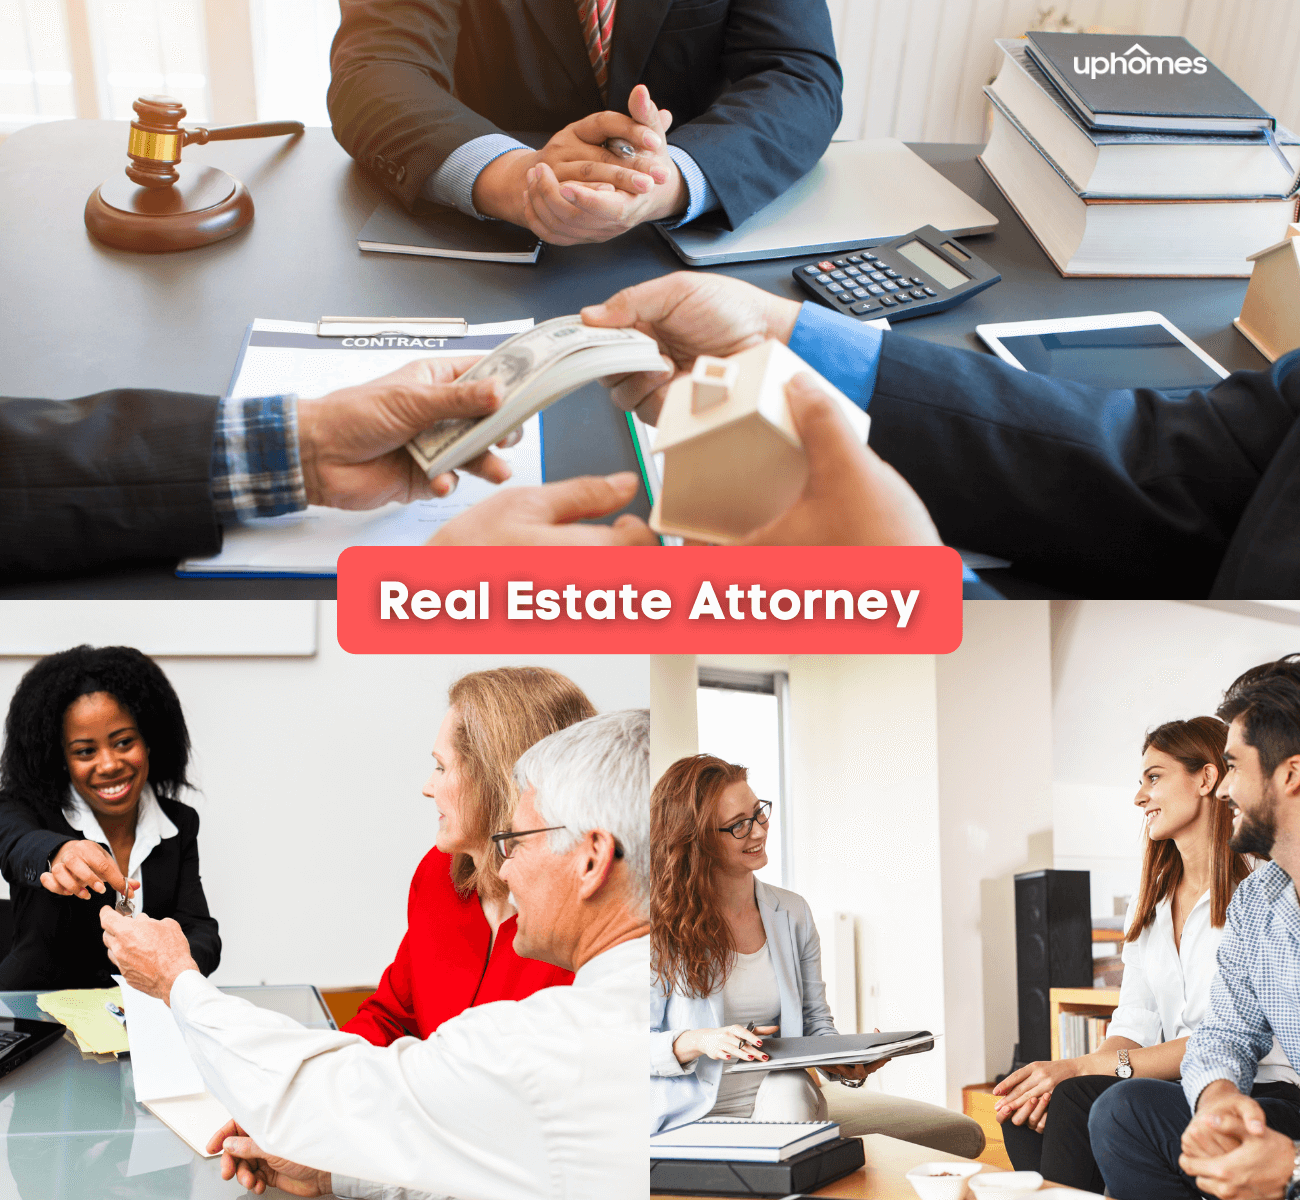 What does a Real Estate Attorney Do? 10 Things that Real Estate Attorneys Do for Both Buyers and Sellers during a home purchase!